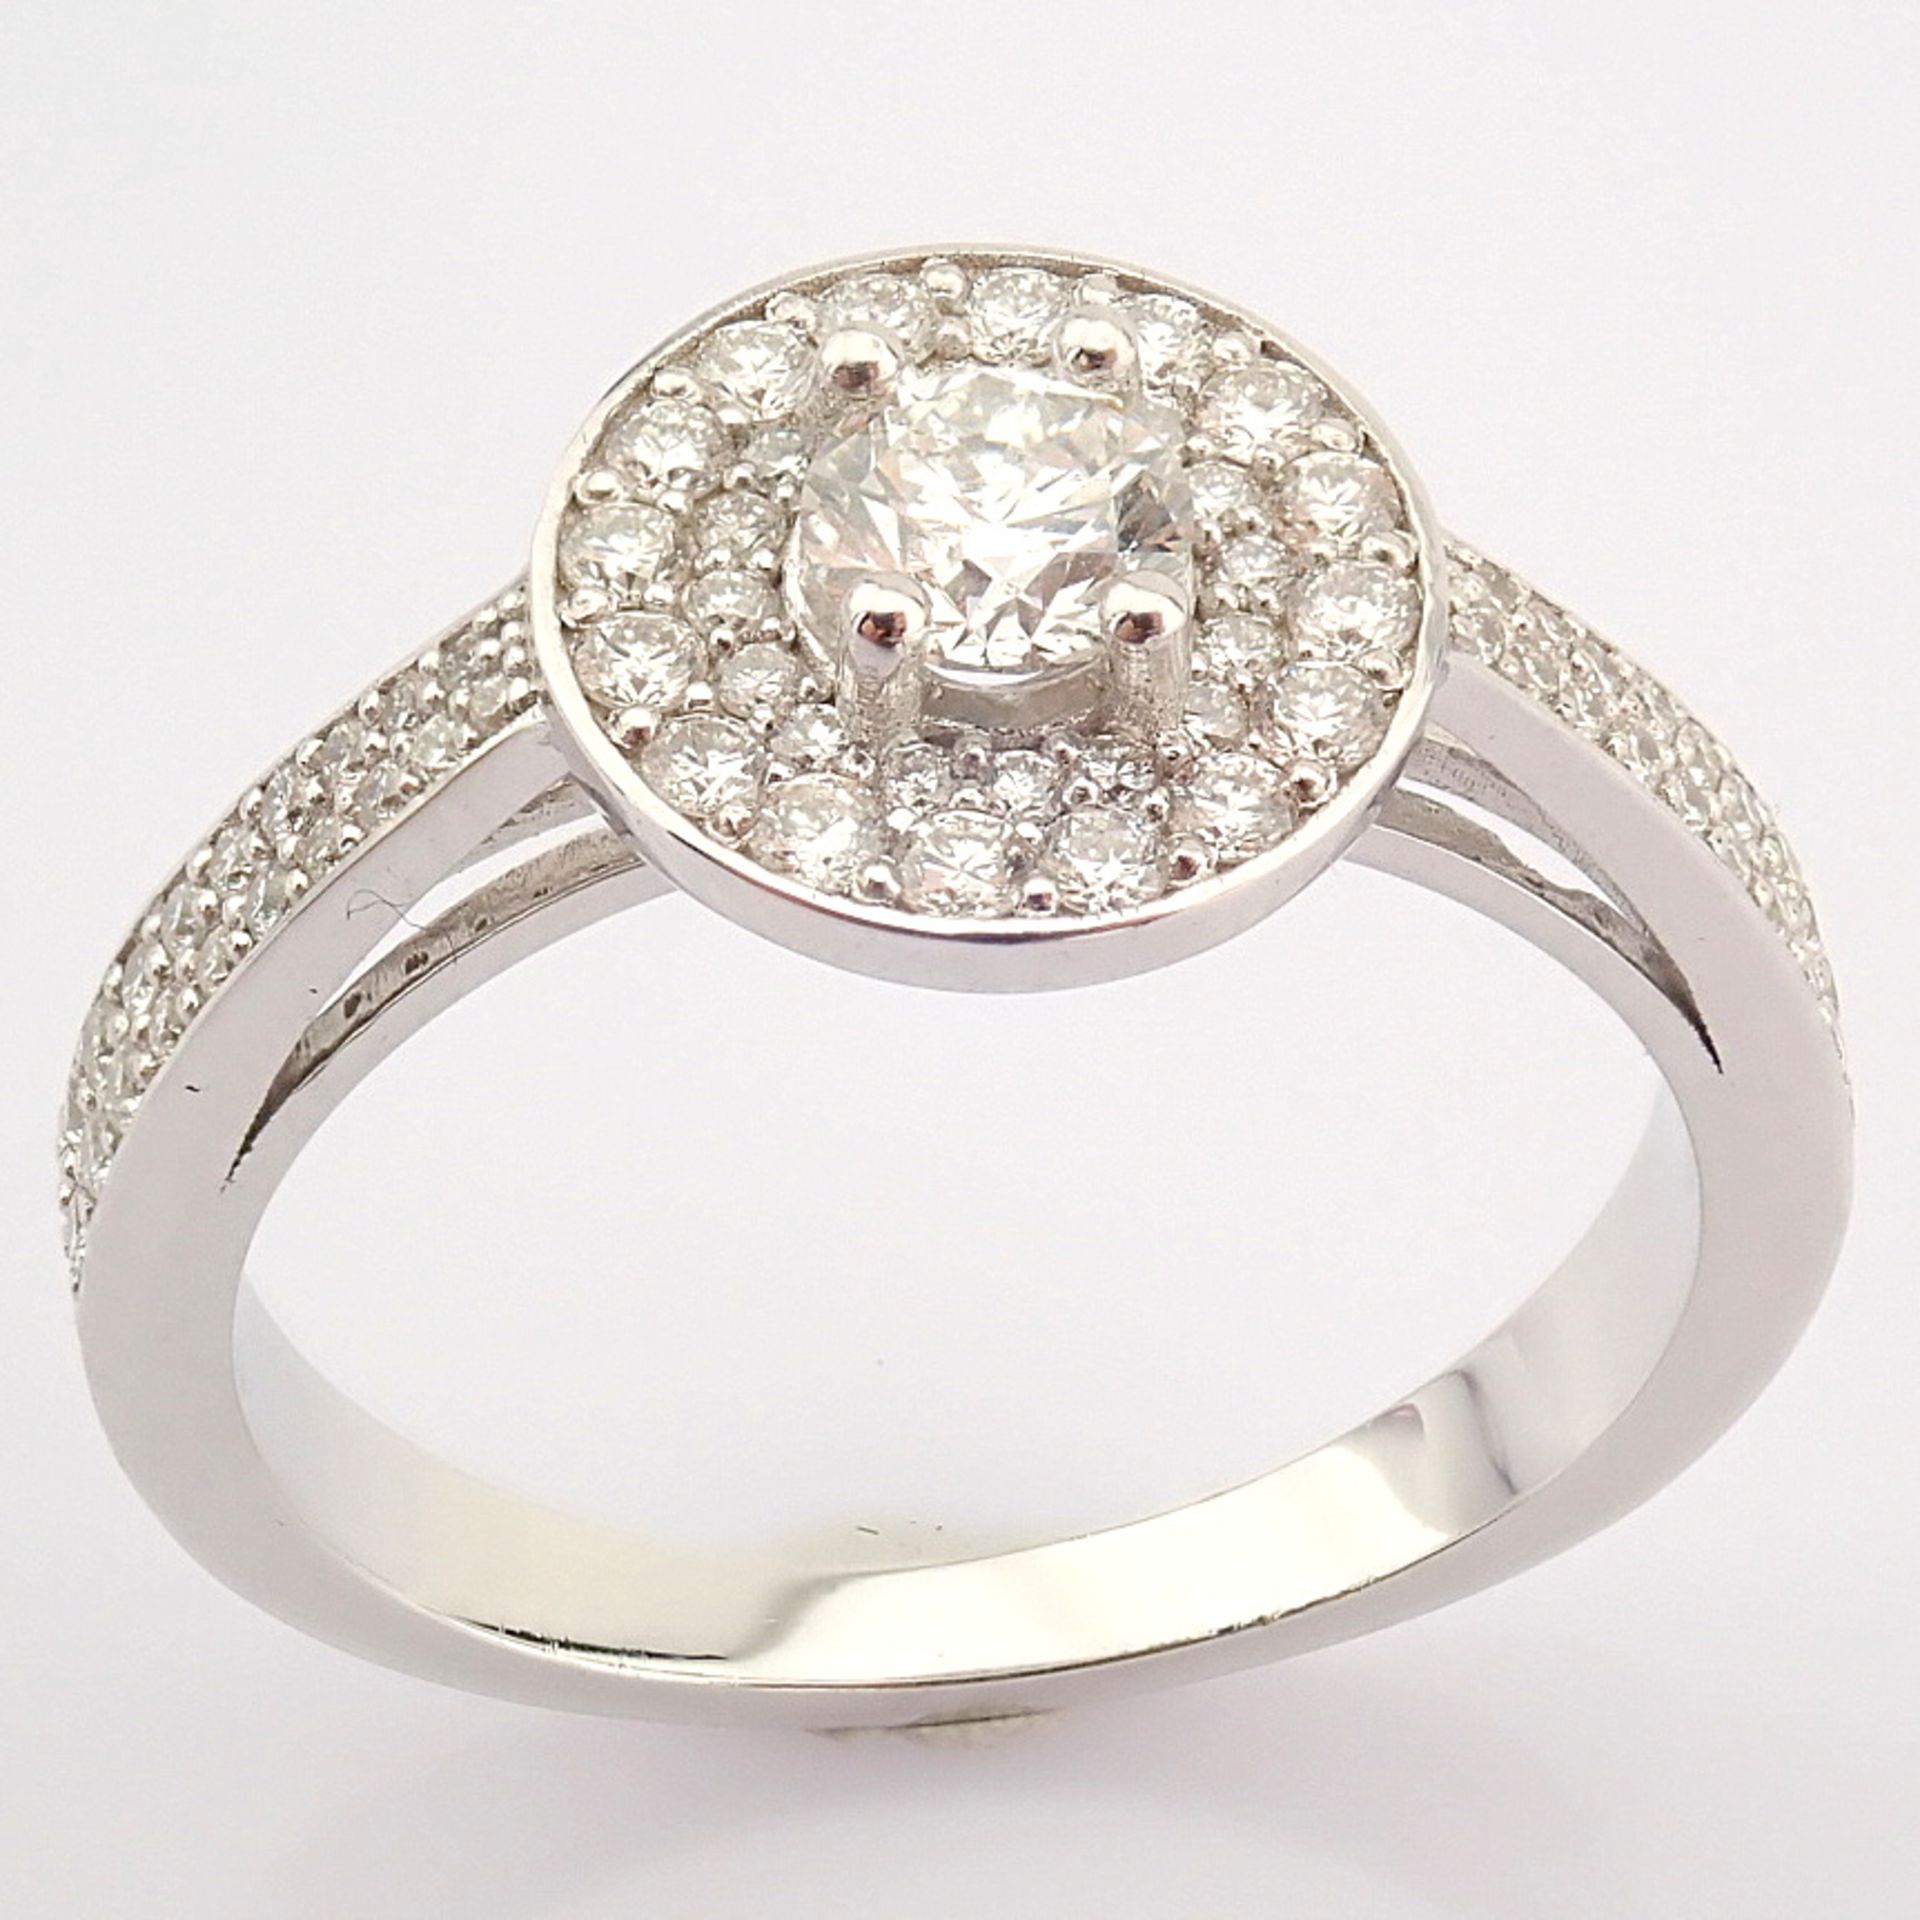 Certificated 18k White Gold Diamond Ring (Total 0.75 ct Stone) - Image 15 of 16